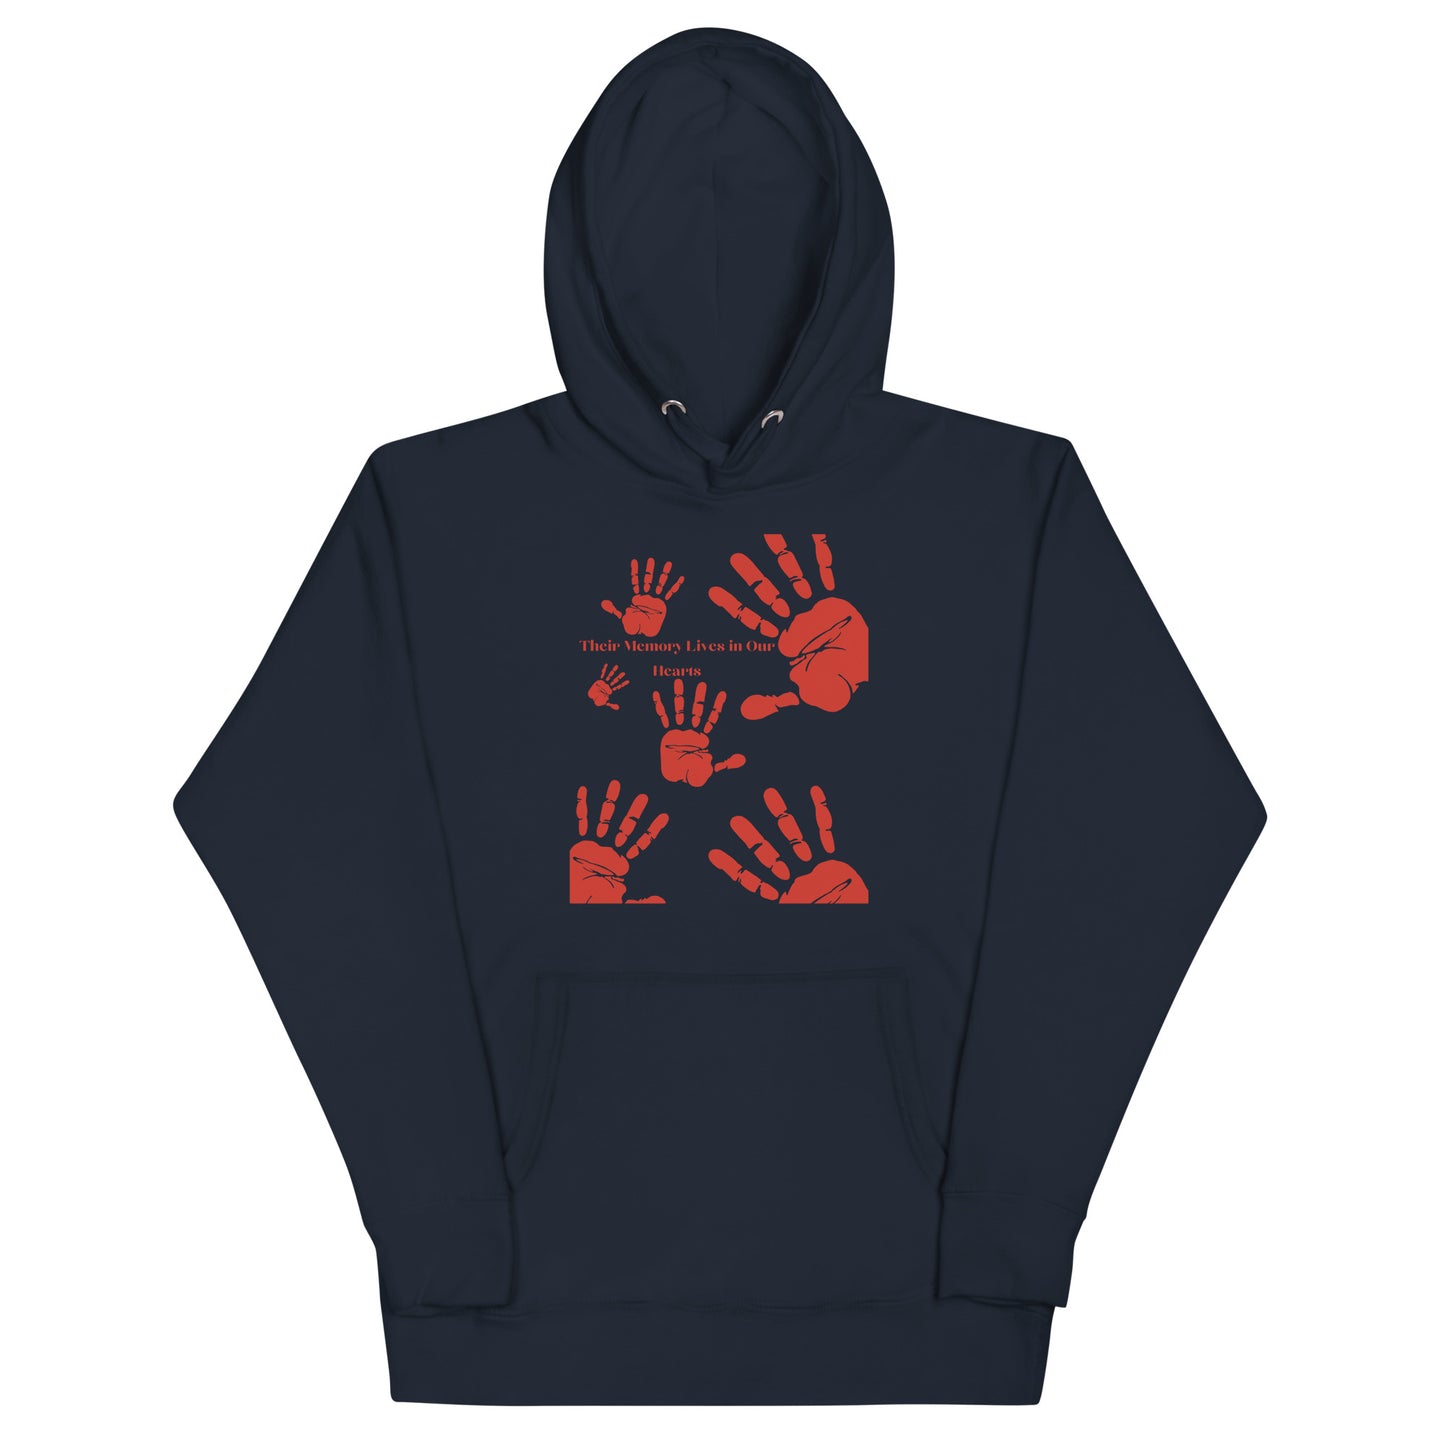 Their memory lives in our hearts - Unisex Hoodie (6 colors)